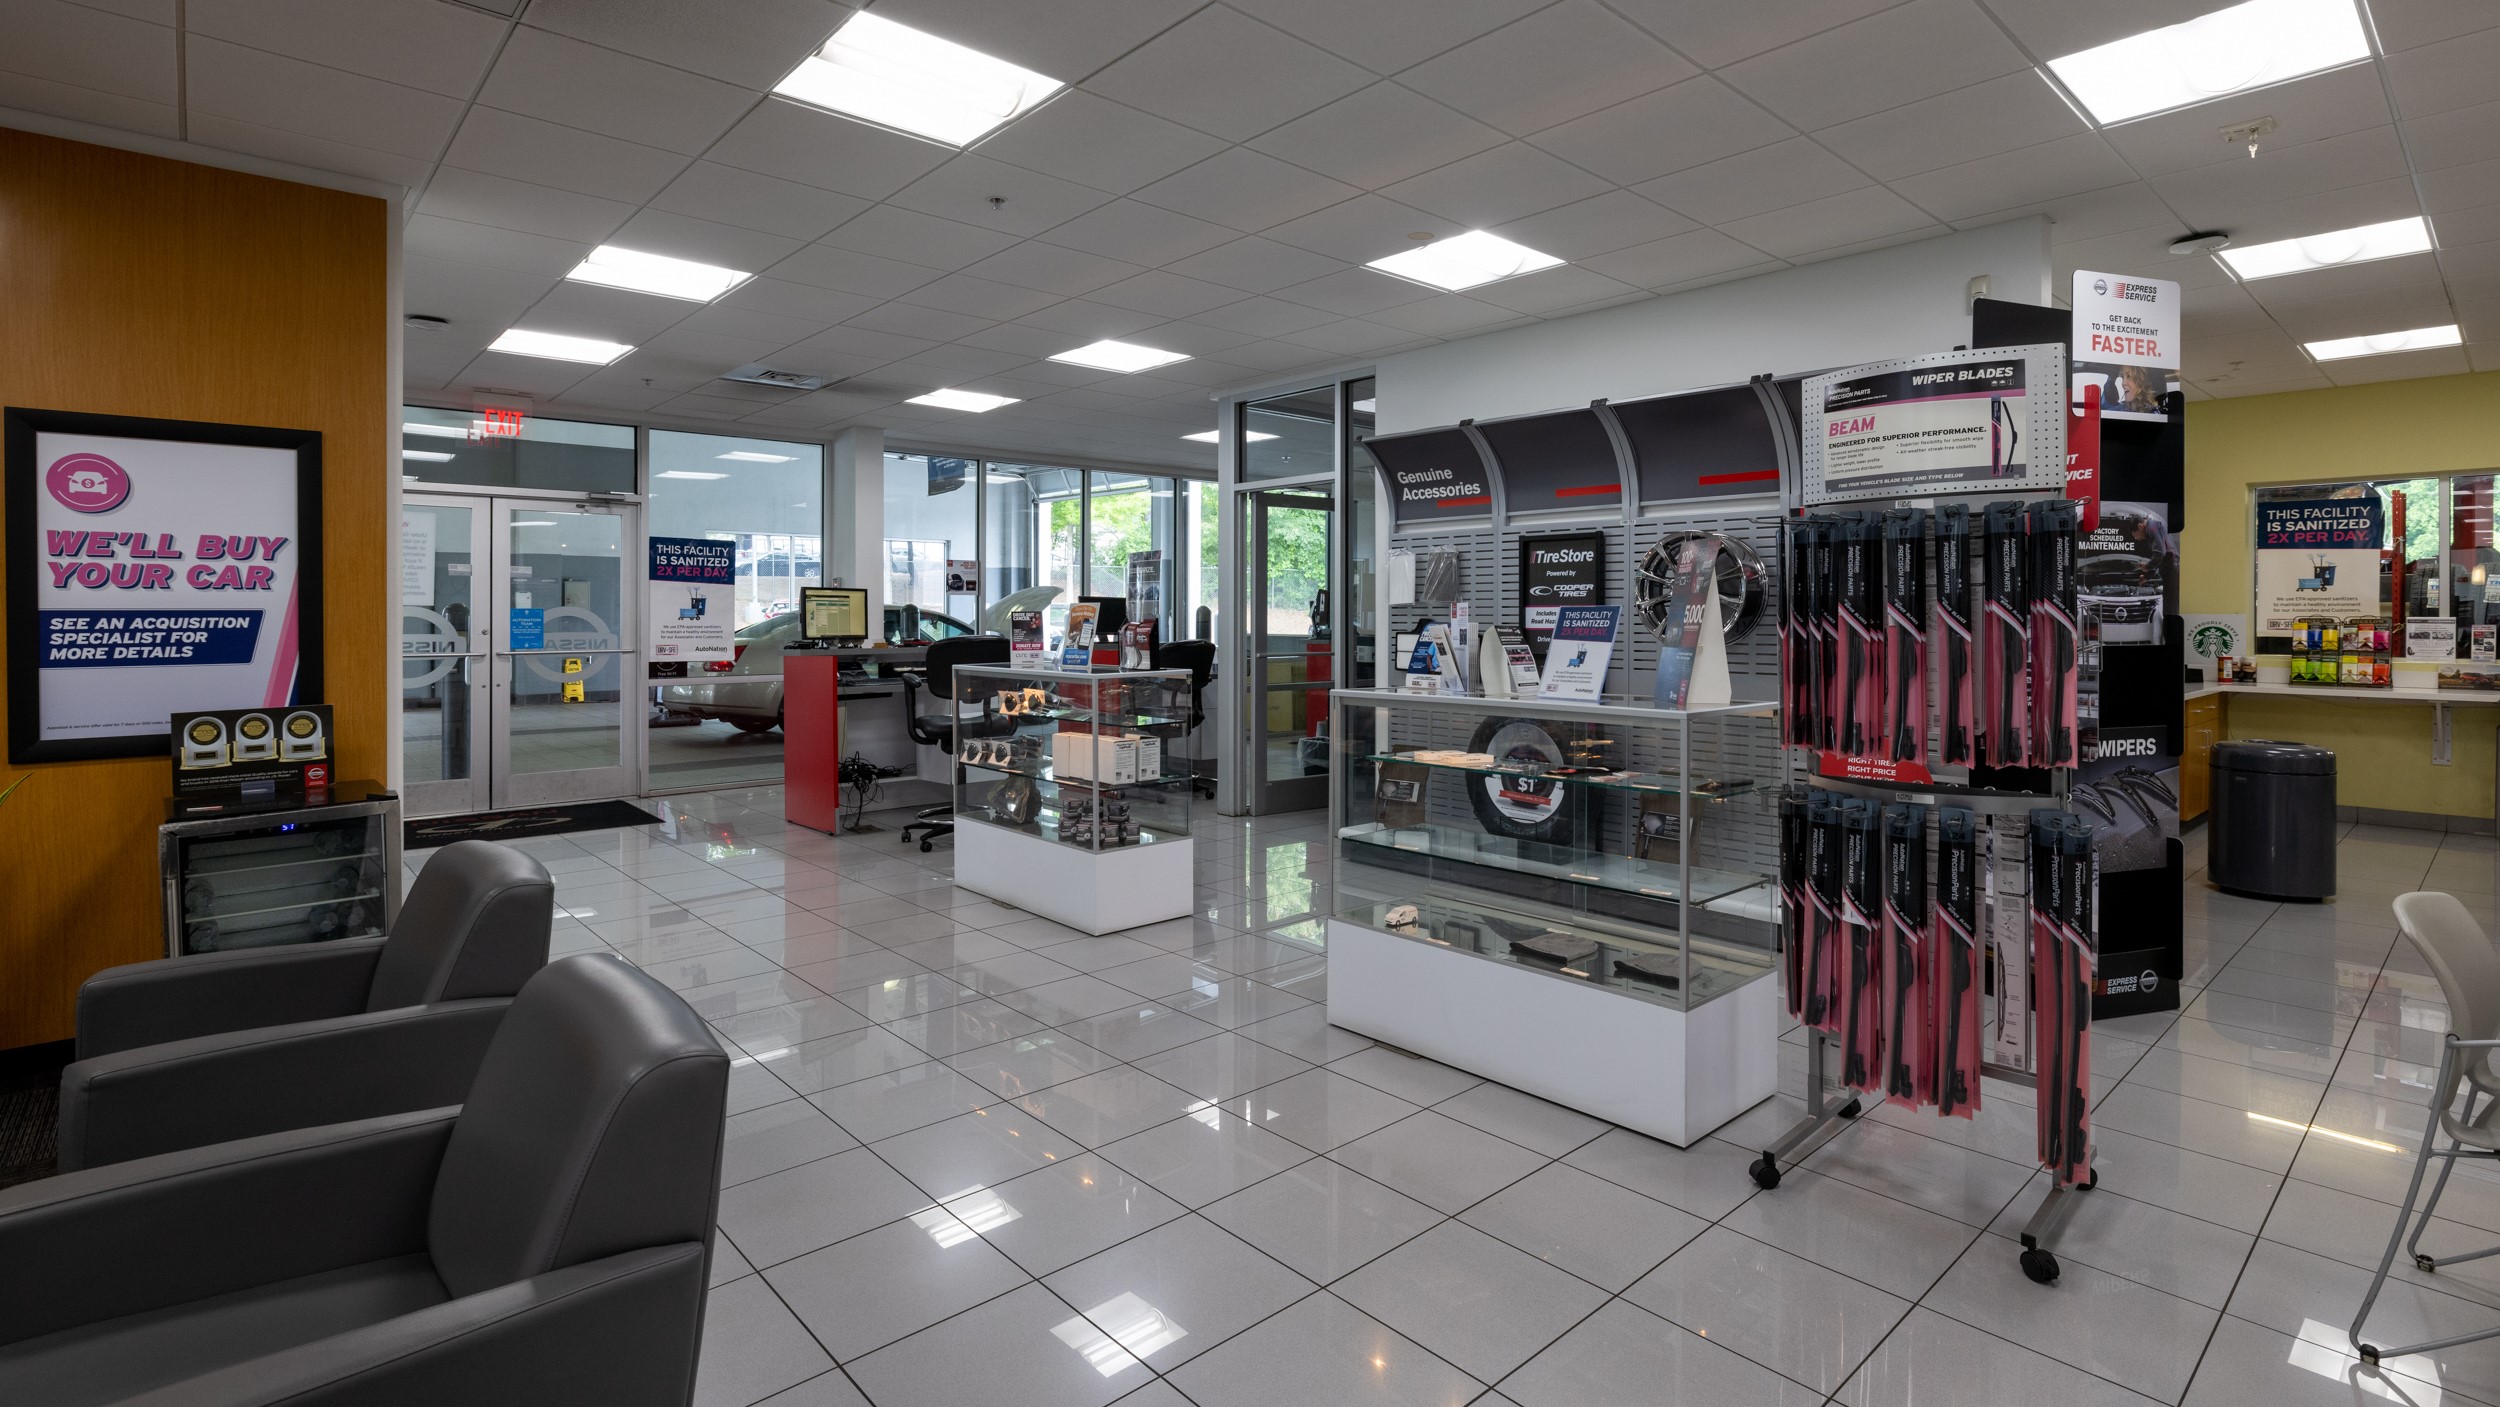 Interior view of AutoNation Nissan Marietta during the day